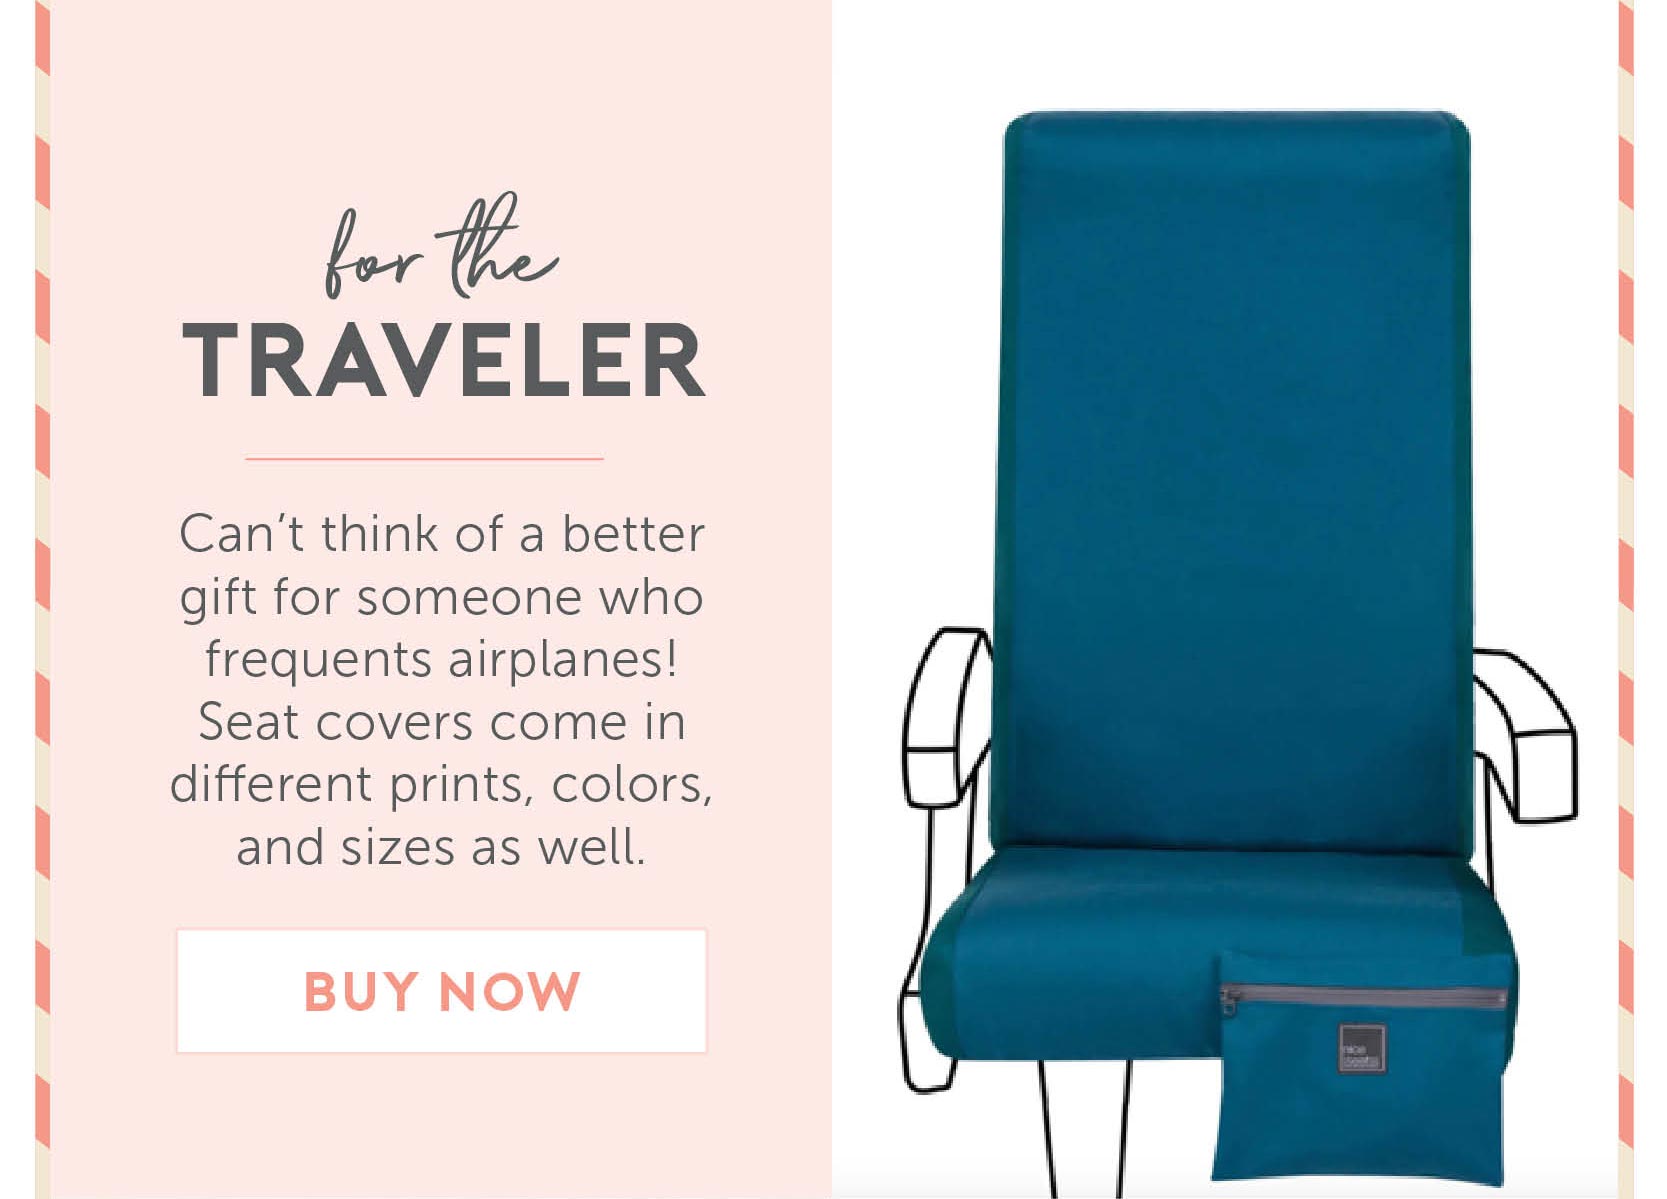 For the traveler: Can’t think of a better gift for someone who frequents airplanes! Seat covers come in different prints, colors, and sizes as well.